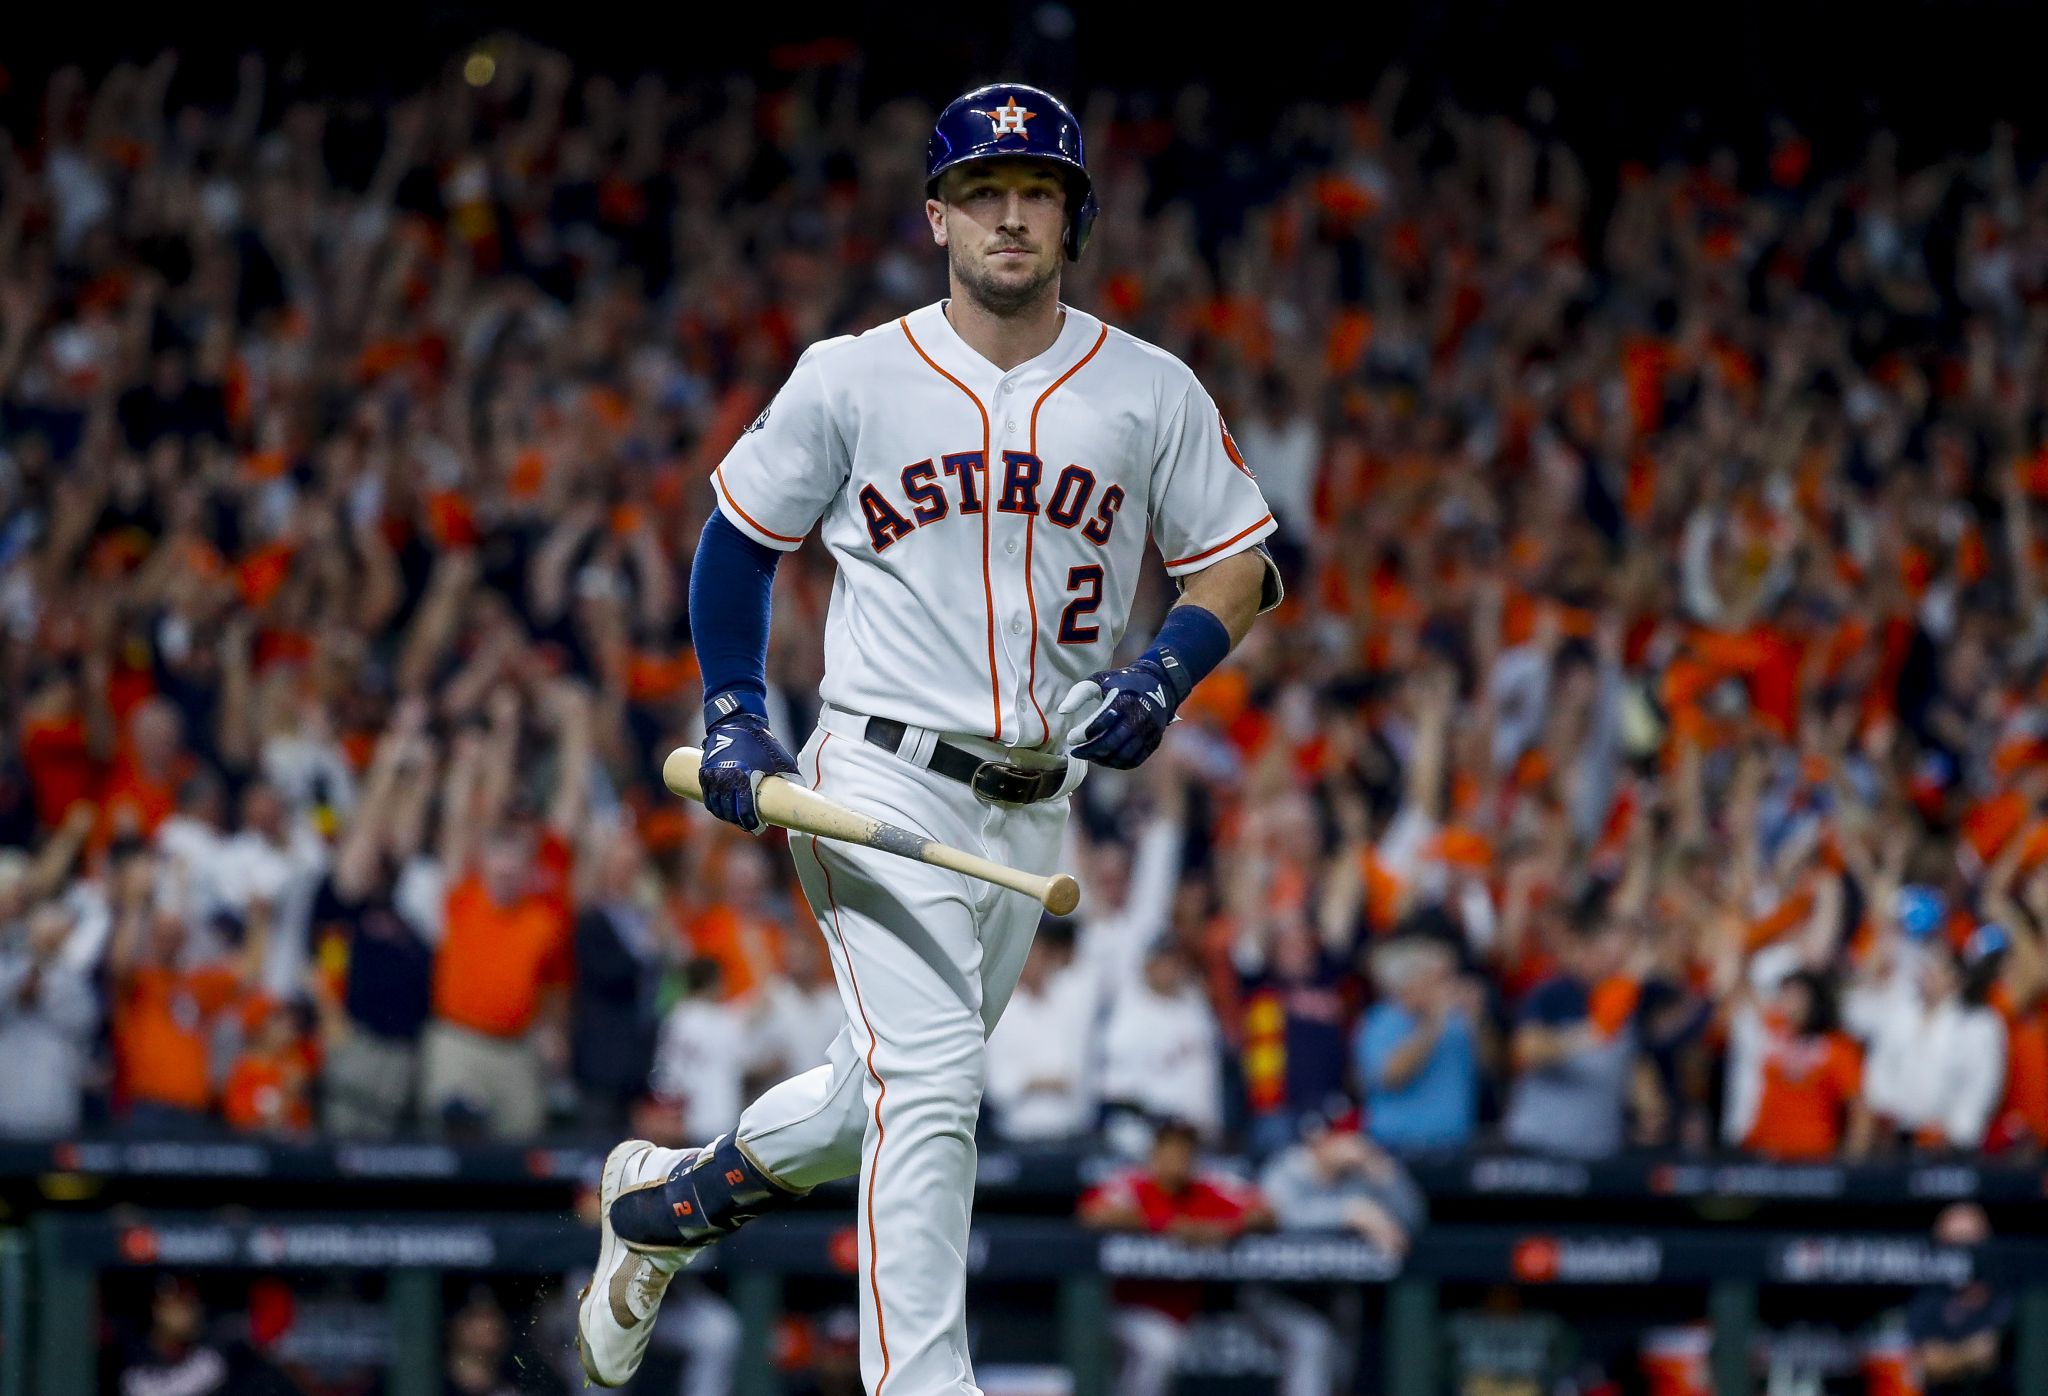 Ex-manager A.J. Hinch says he's not aware of Astros wearing buzzers